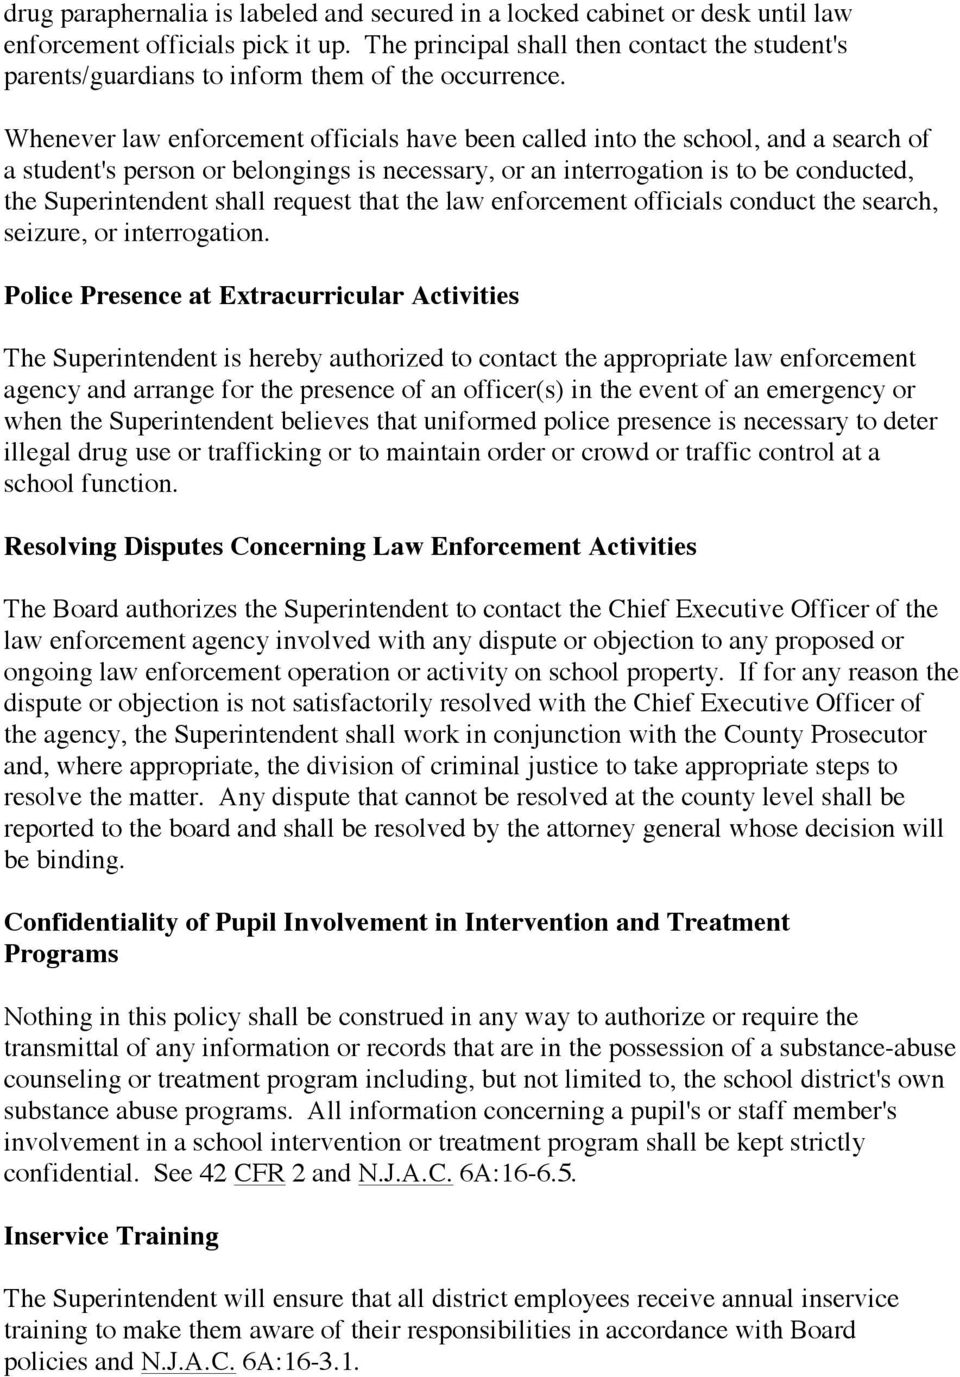 Whenever law enforcement officials have been called into the school, and a search of a student's person or belongings is necessary, or an interrogation is to be conducted, the Superintendent shall